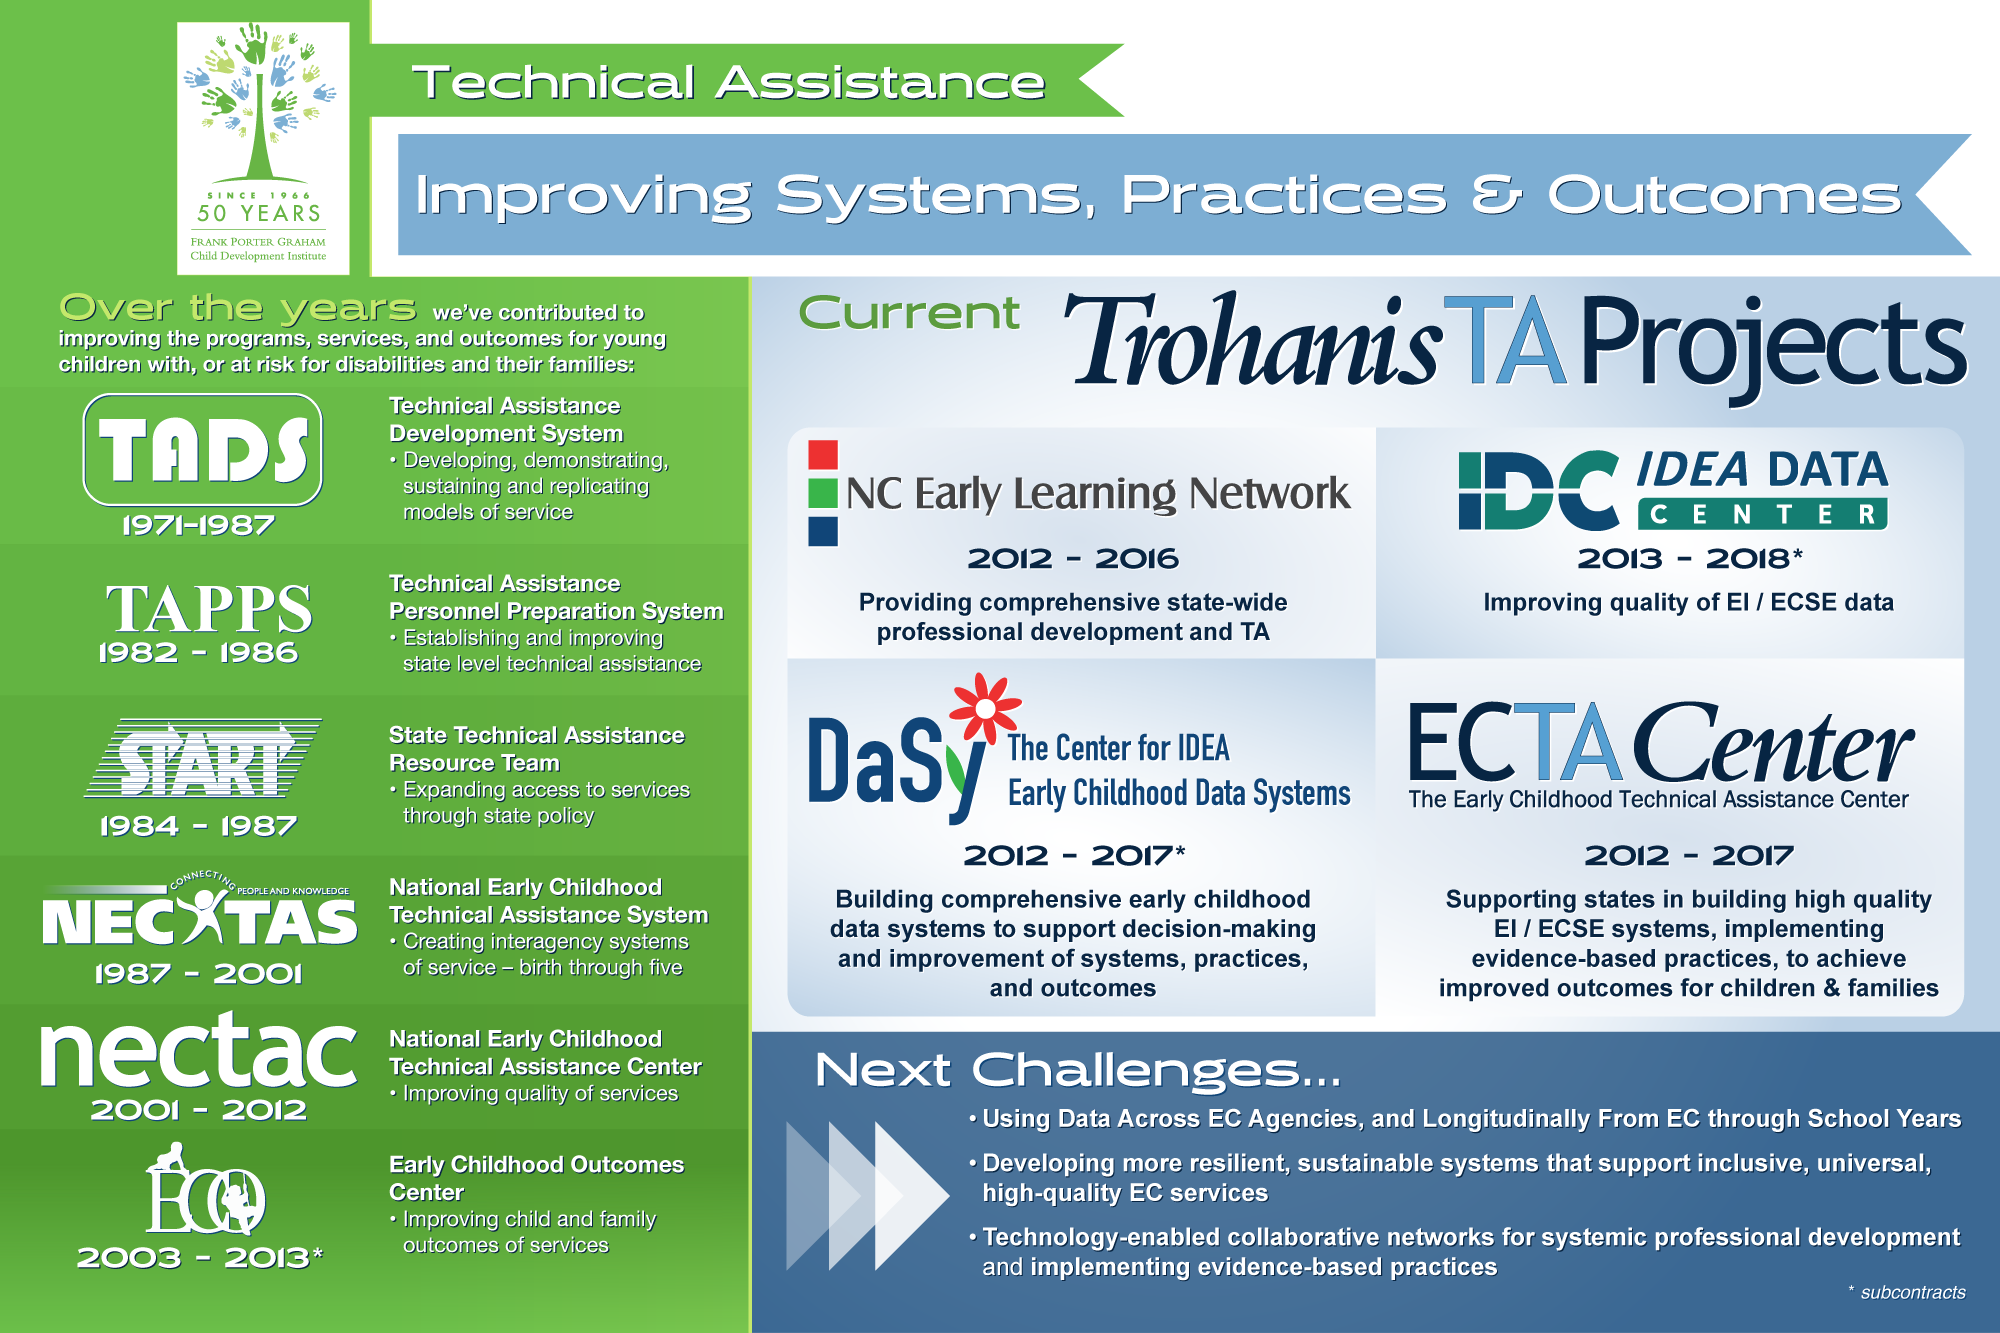 Trohanis TA Projects Overview Poster